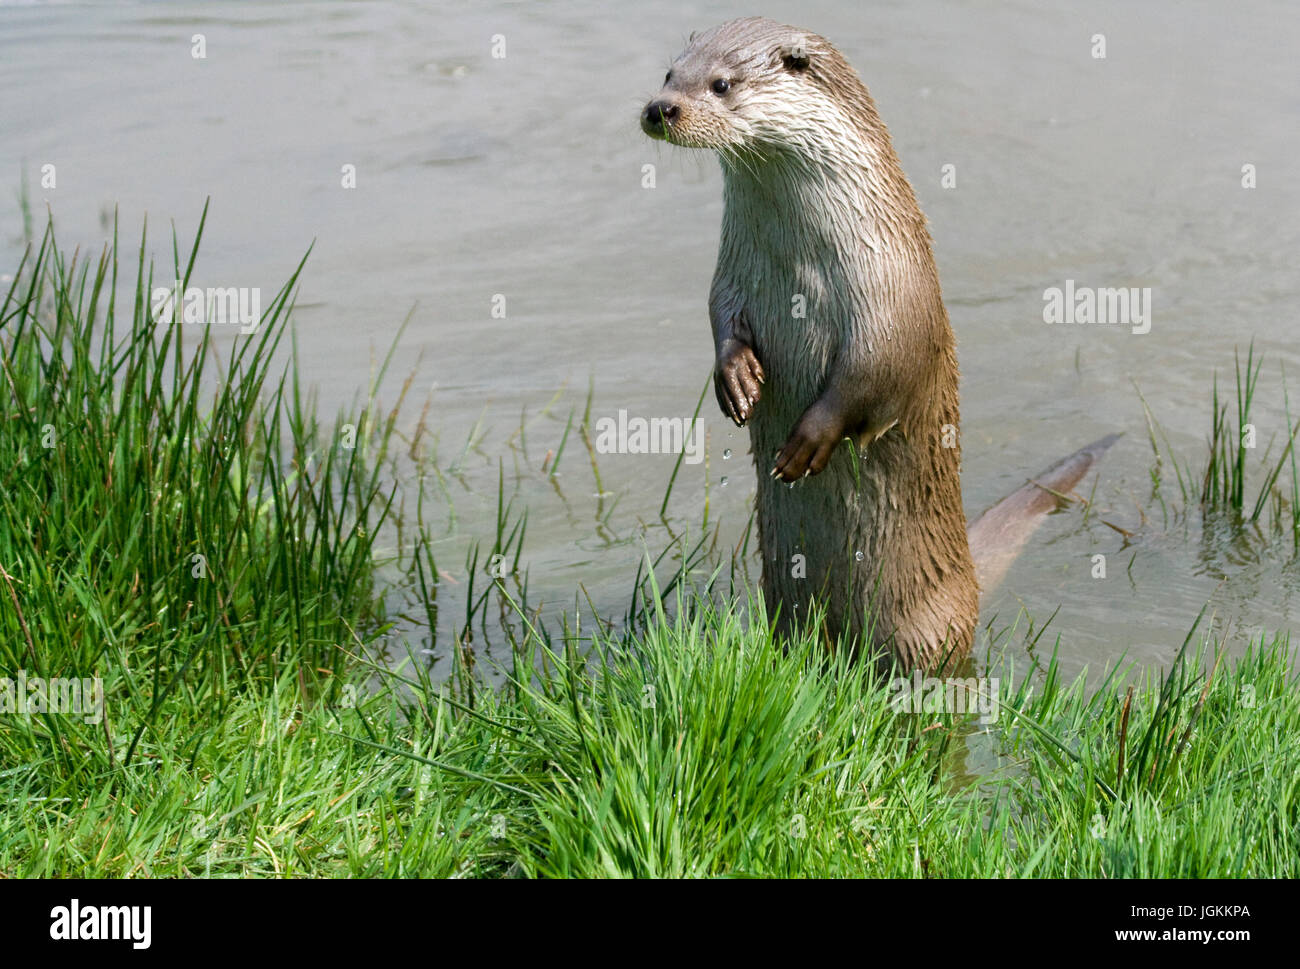 Otter standing upright in water looking over bank with diagonally split grassy bank and water in landscape format. Room for copy or text. Stock Photo